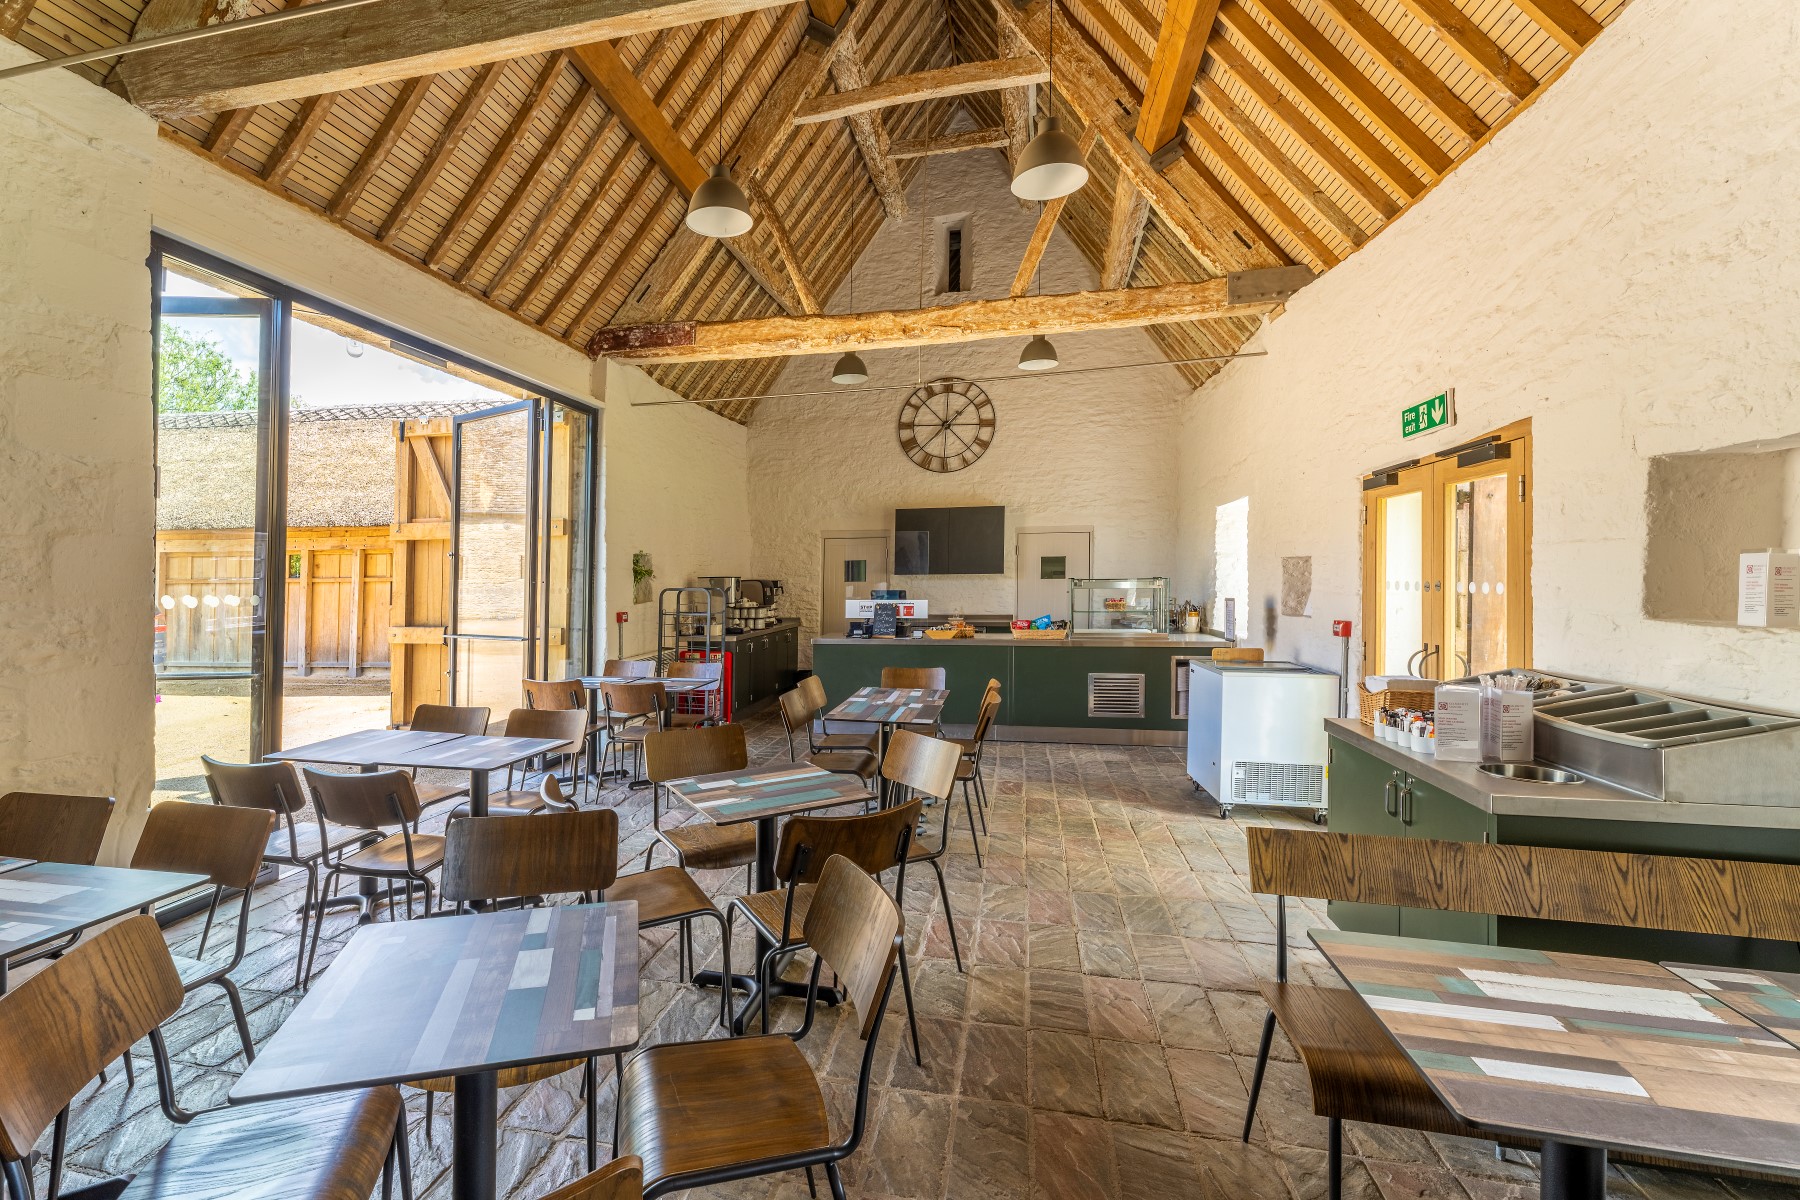 A large open space with high ceilings and wooden beams. Tables and chairs are over the barn and there is a counter at the back of the room for with cases for tea and treats.